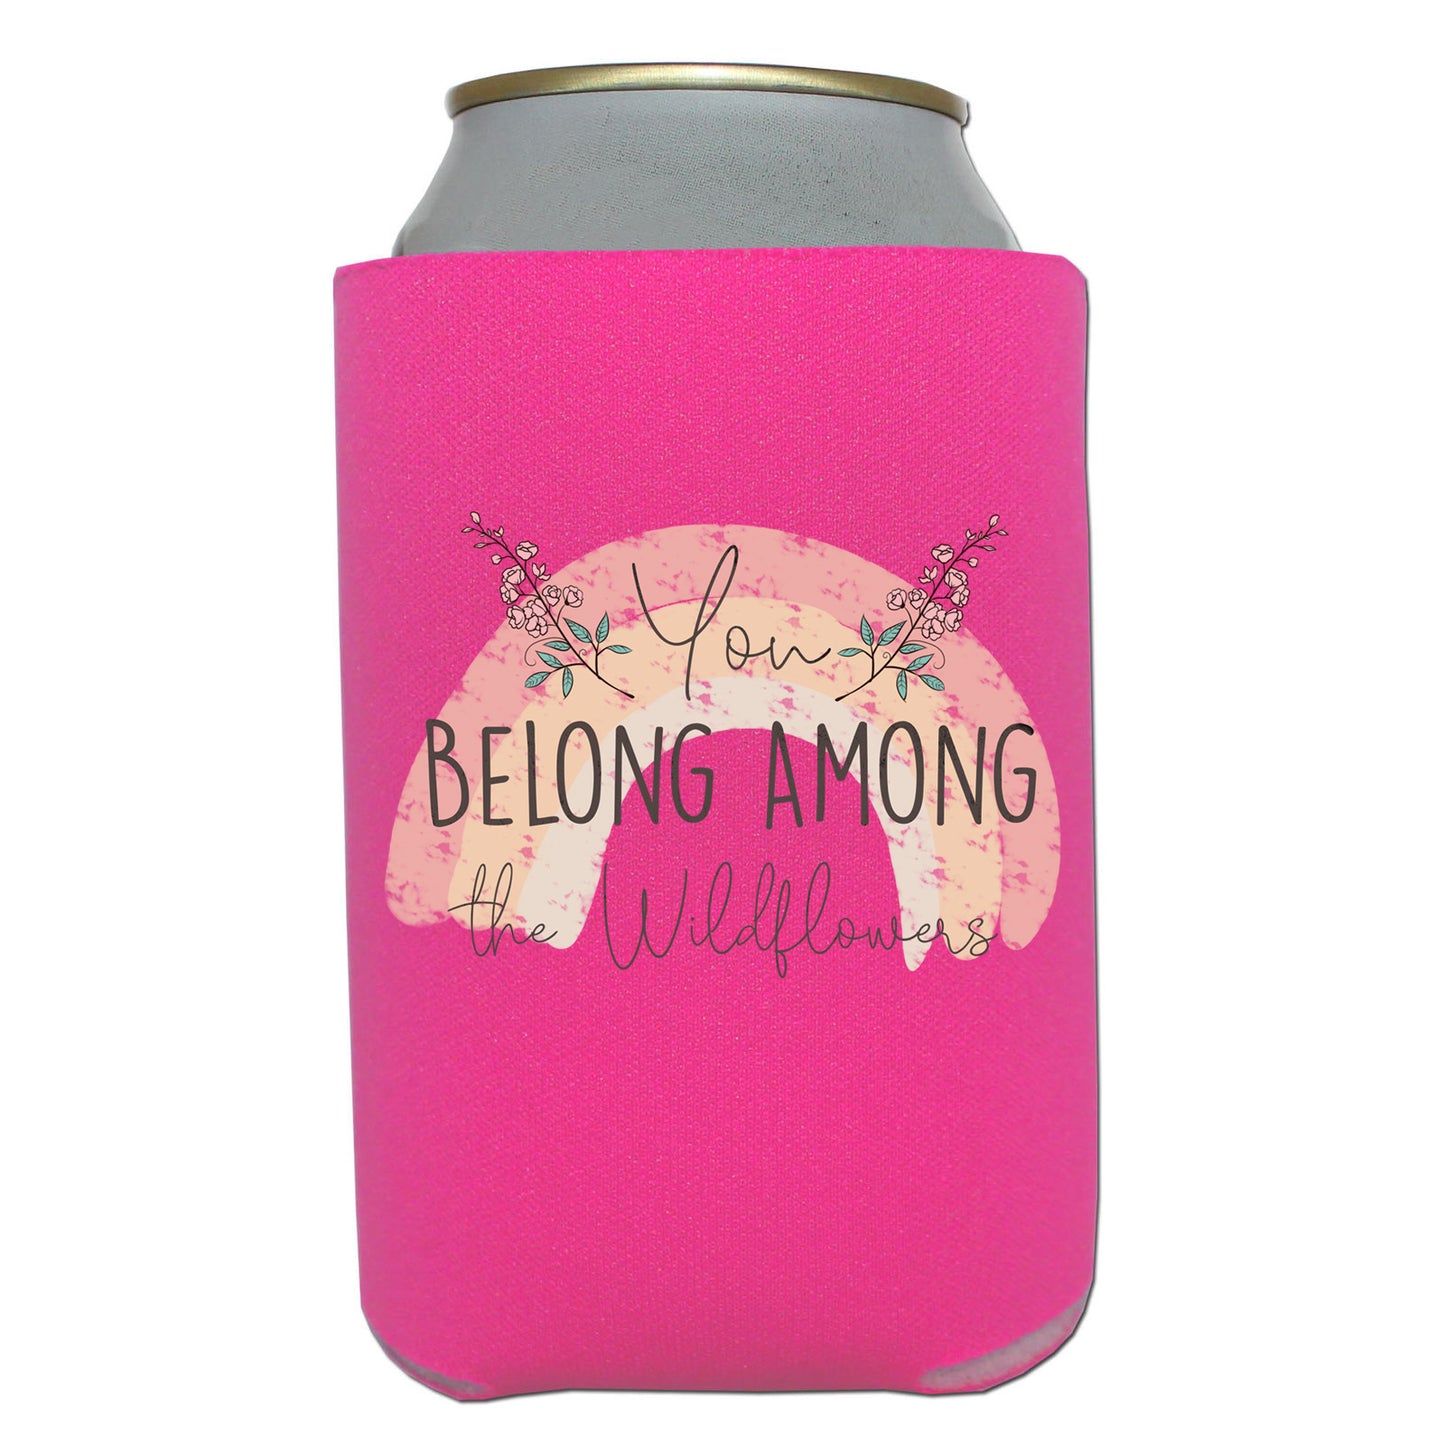 You Belong Among the Wildflowers (Pocket/Koozie) *full color matte clear film*- 3" wide Plastisol Screen Print Transfer